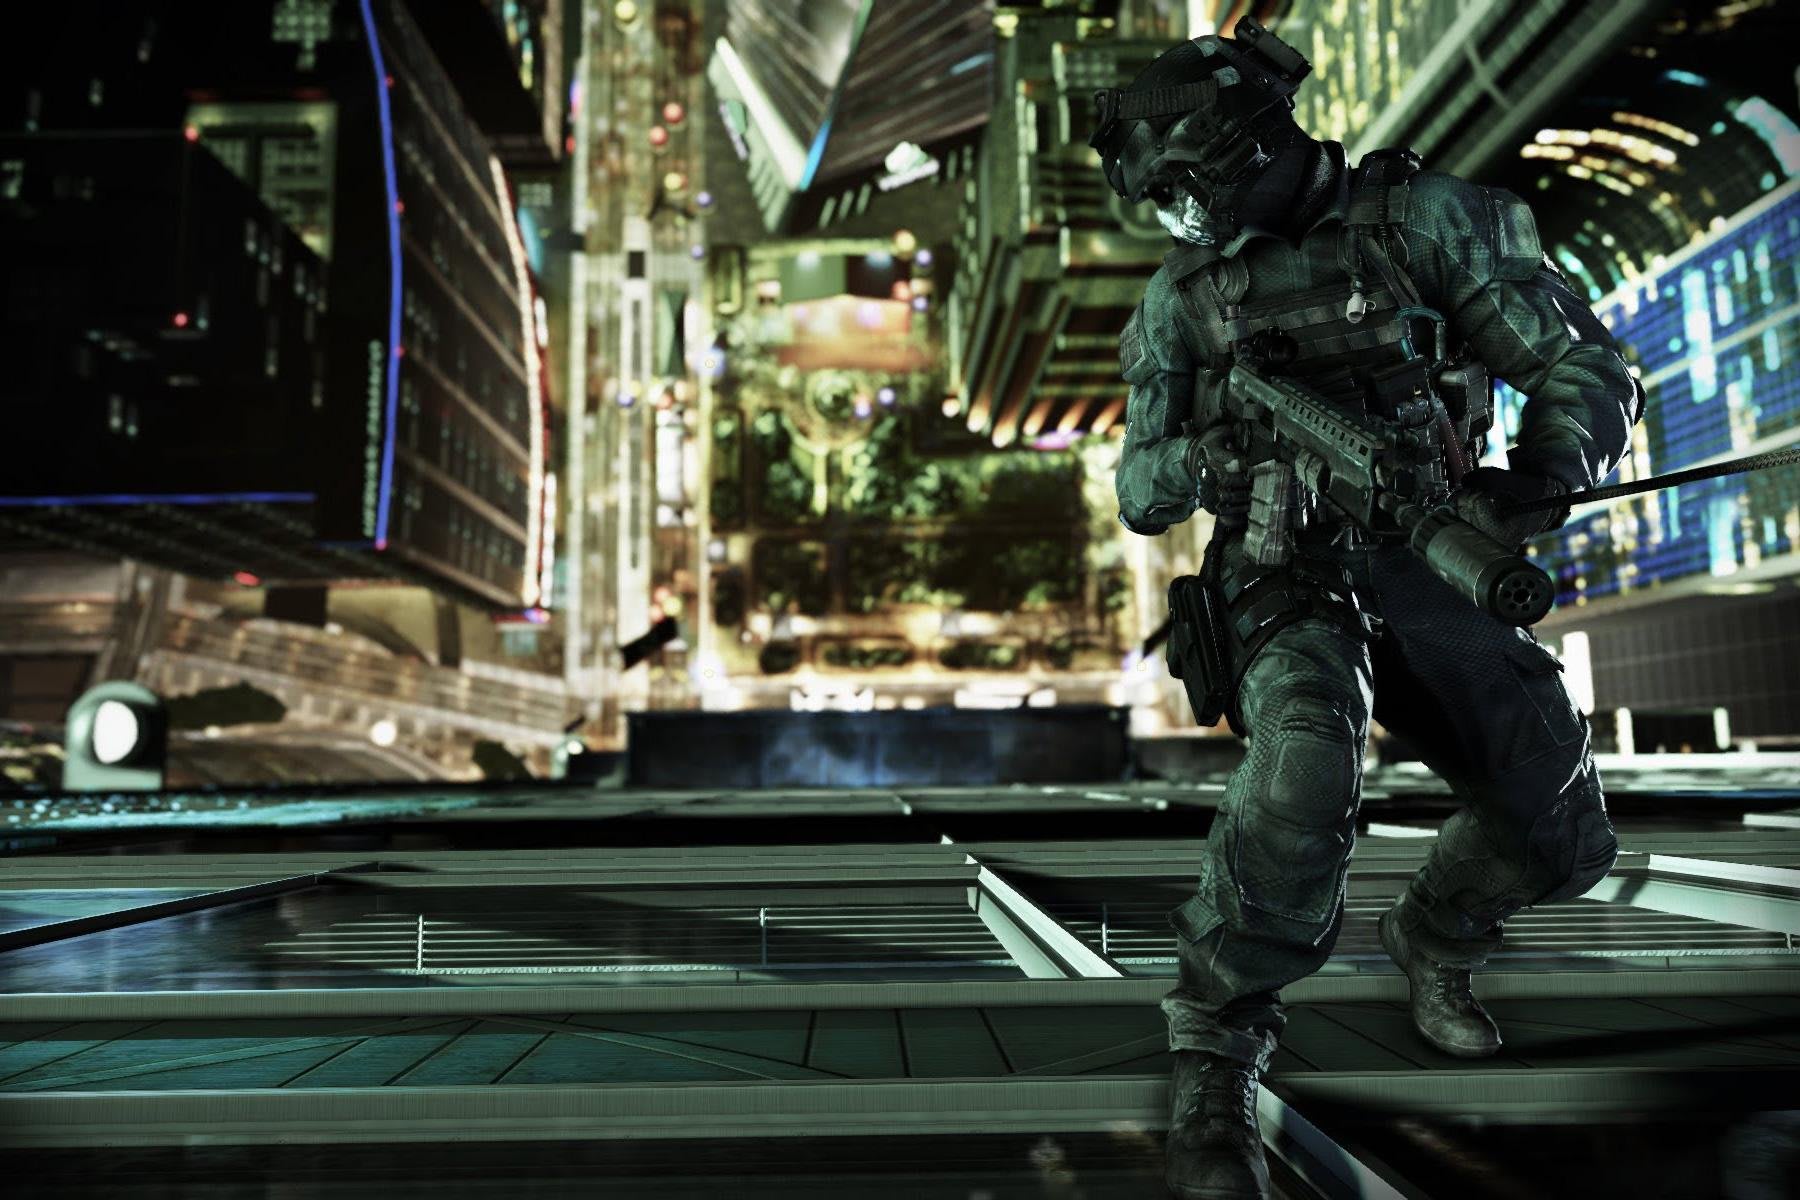 Grid for Call of Duty: Ghosts - Multiplayer by Greens